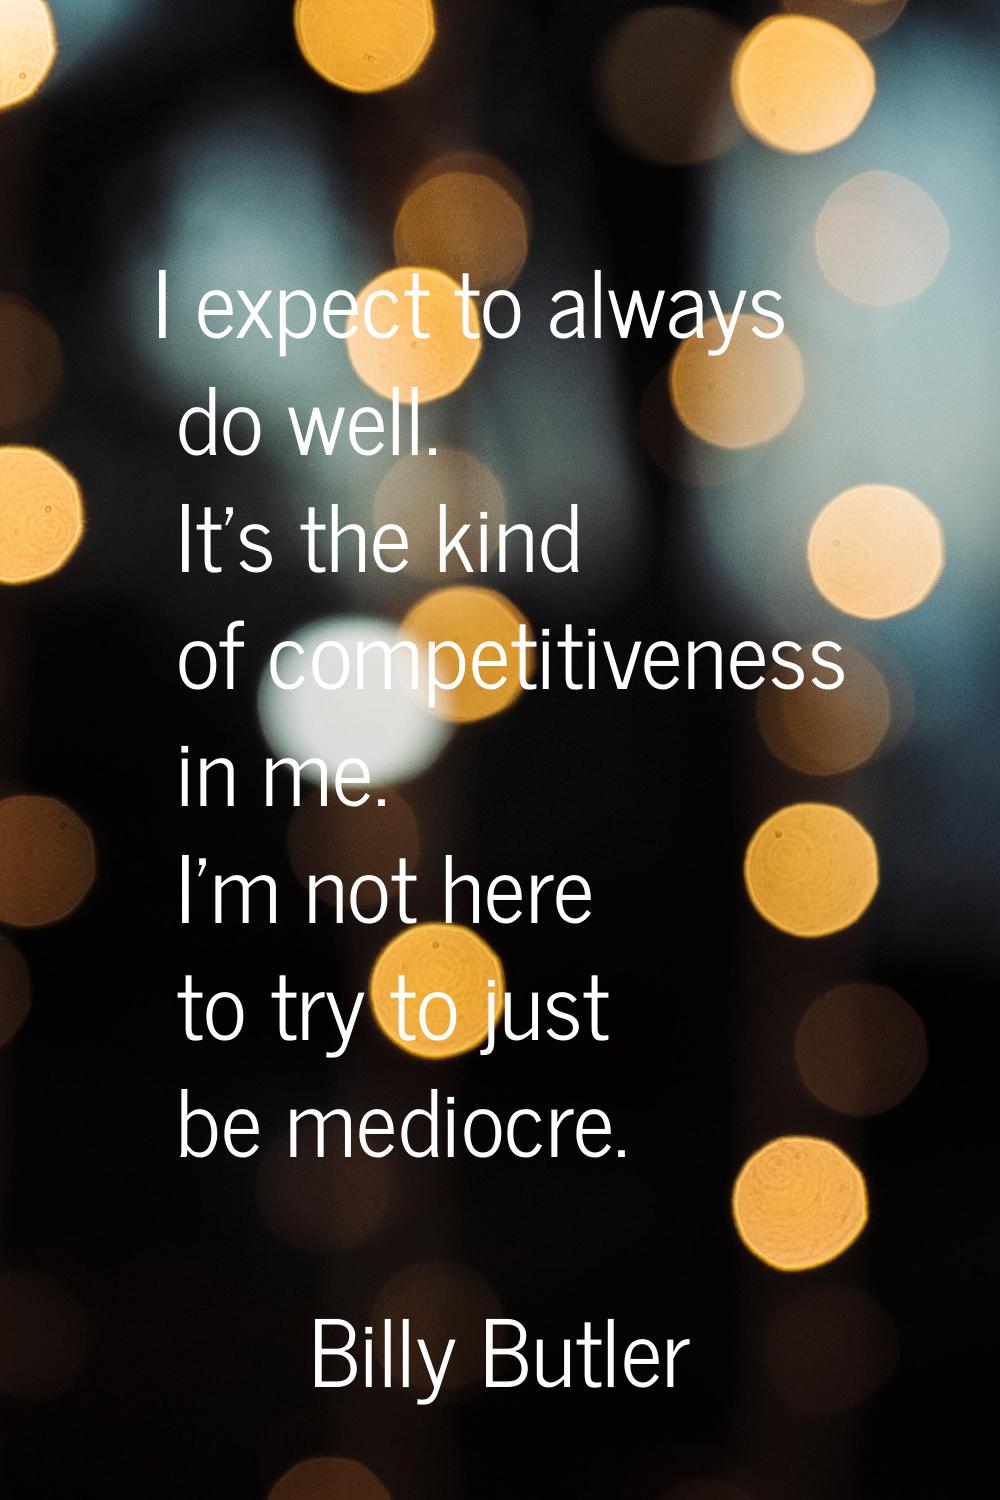 I expect to always do well. It's the kind of competitiveness in me. I'm not here to try to just be 